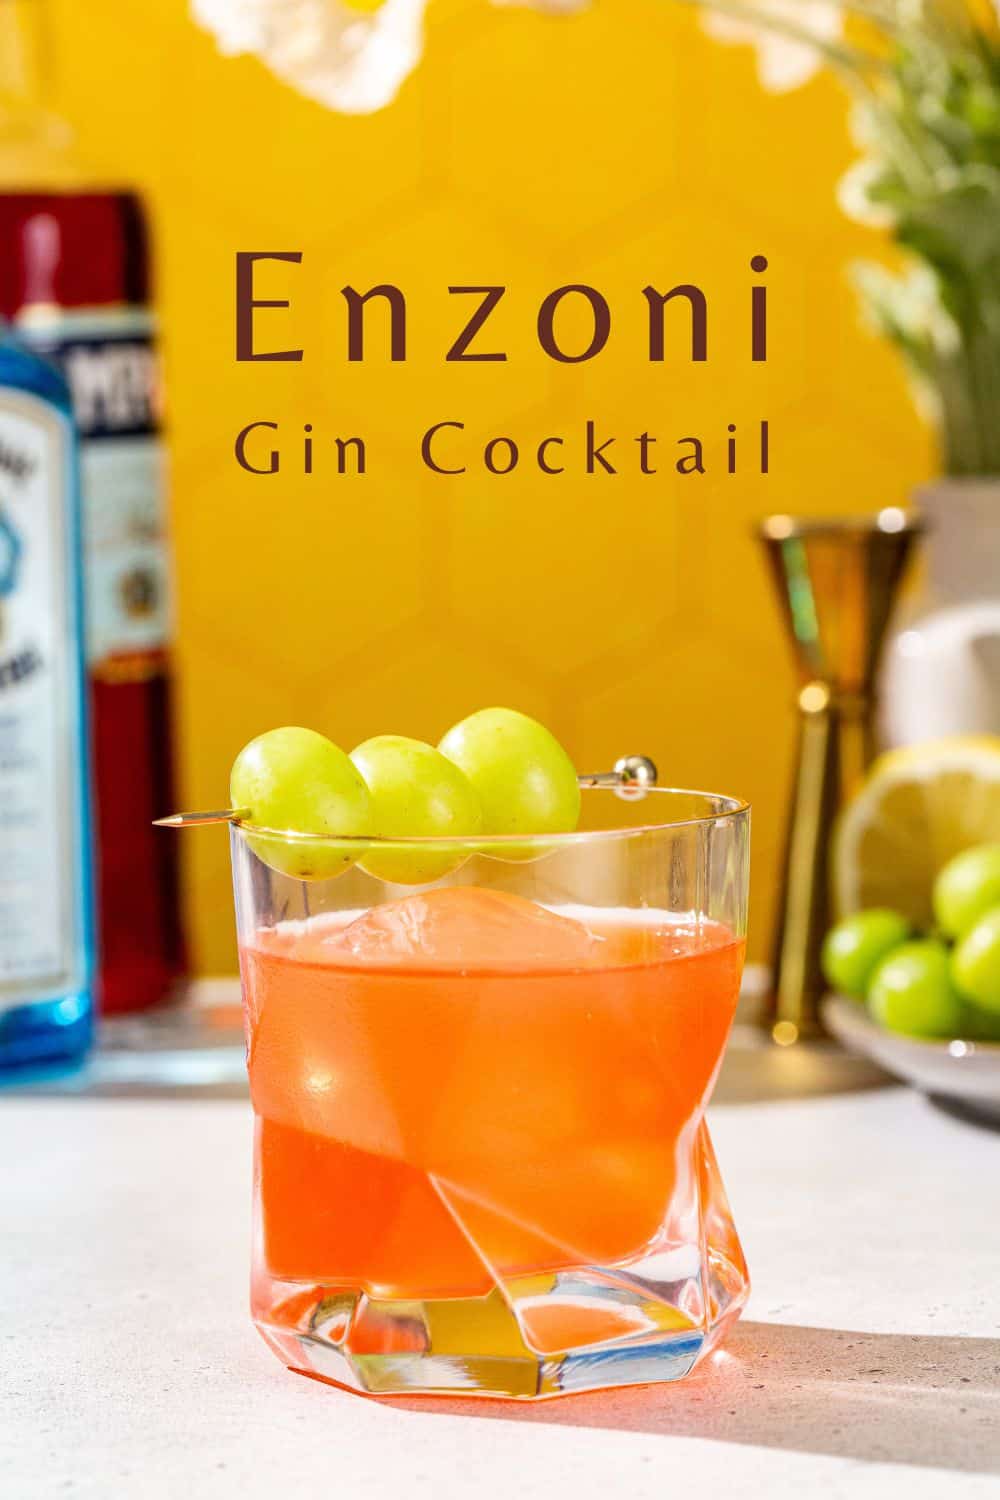 Side view of Enzoni cocktail in an old fashioned cocktail glass. In the background is a bottle of gin and Campari, along with a gold jigger, a cut lemon and green grapes. Text above the drink says “Enzoni gin cocktail”.